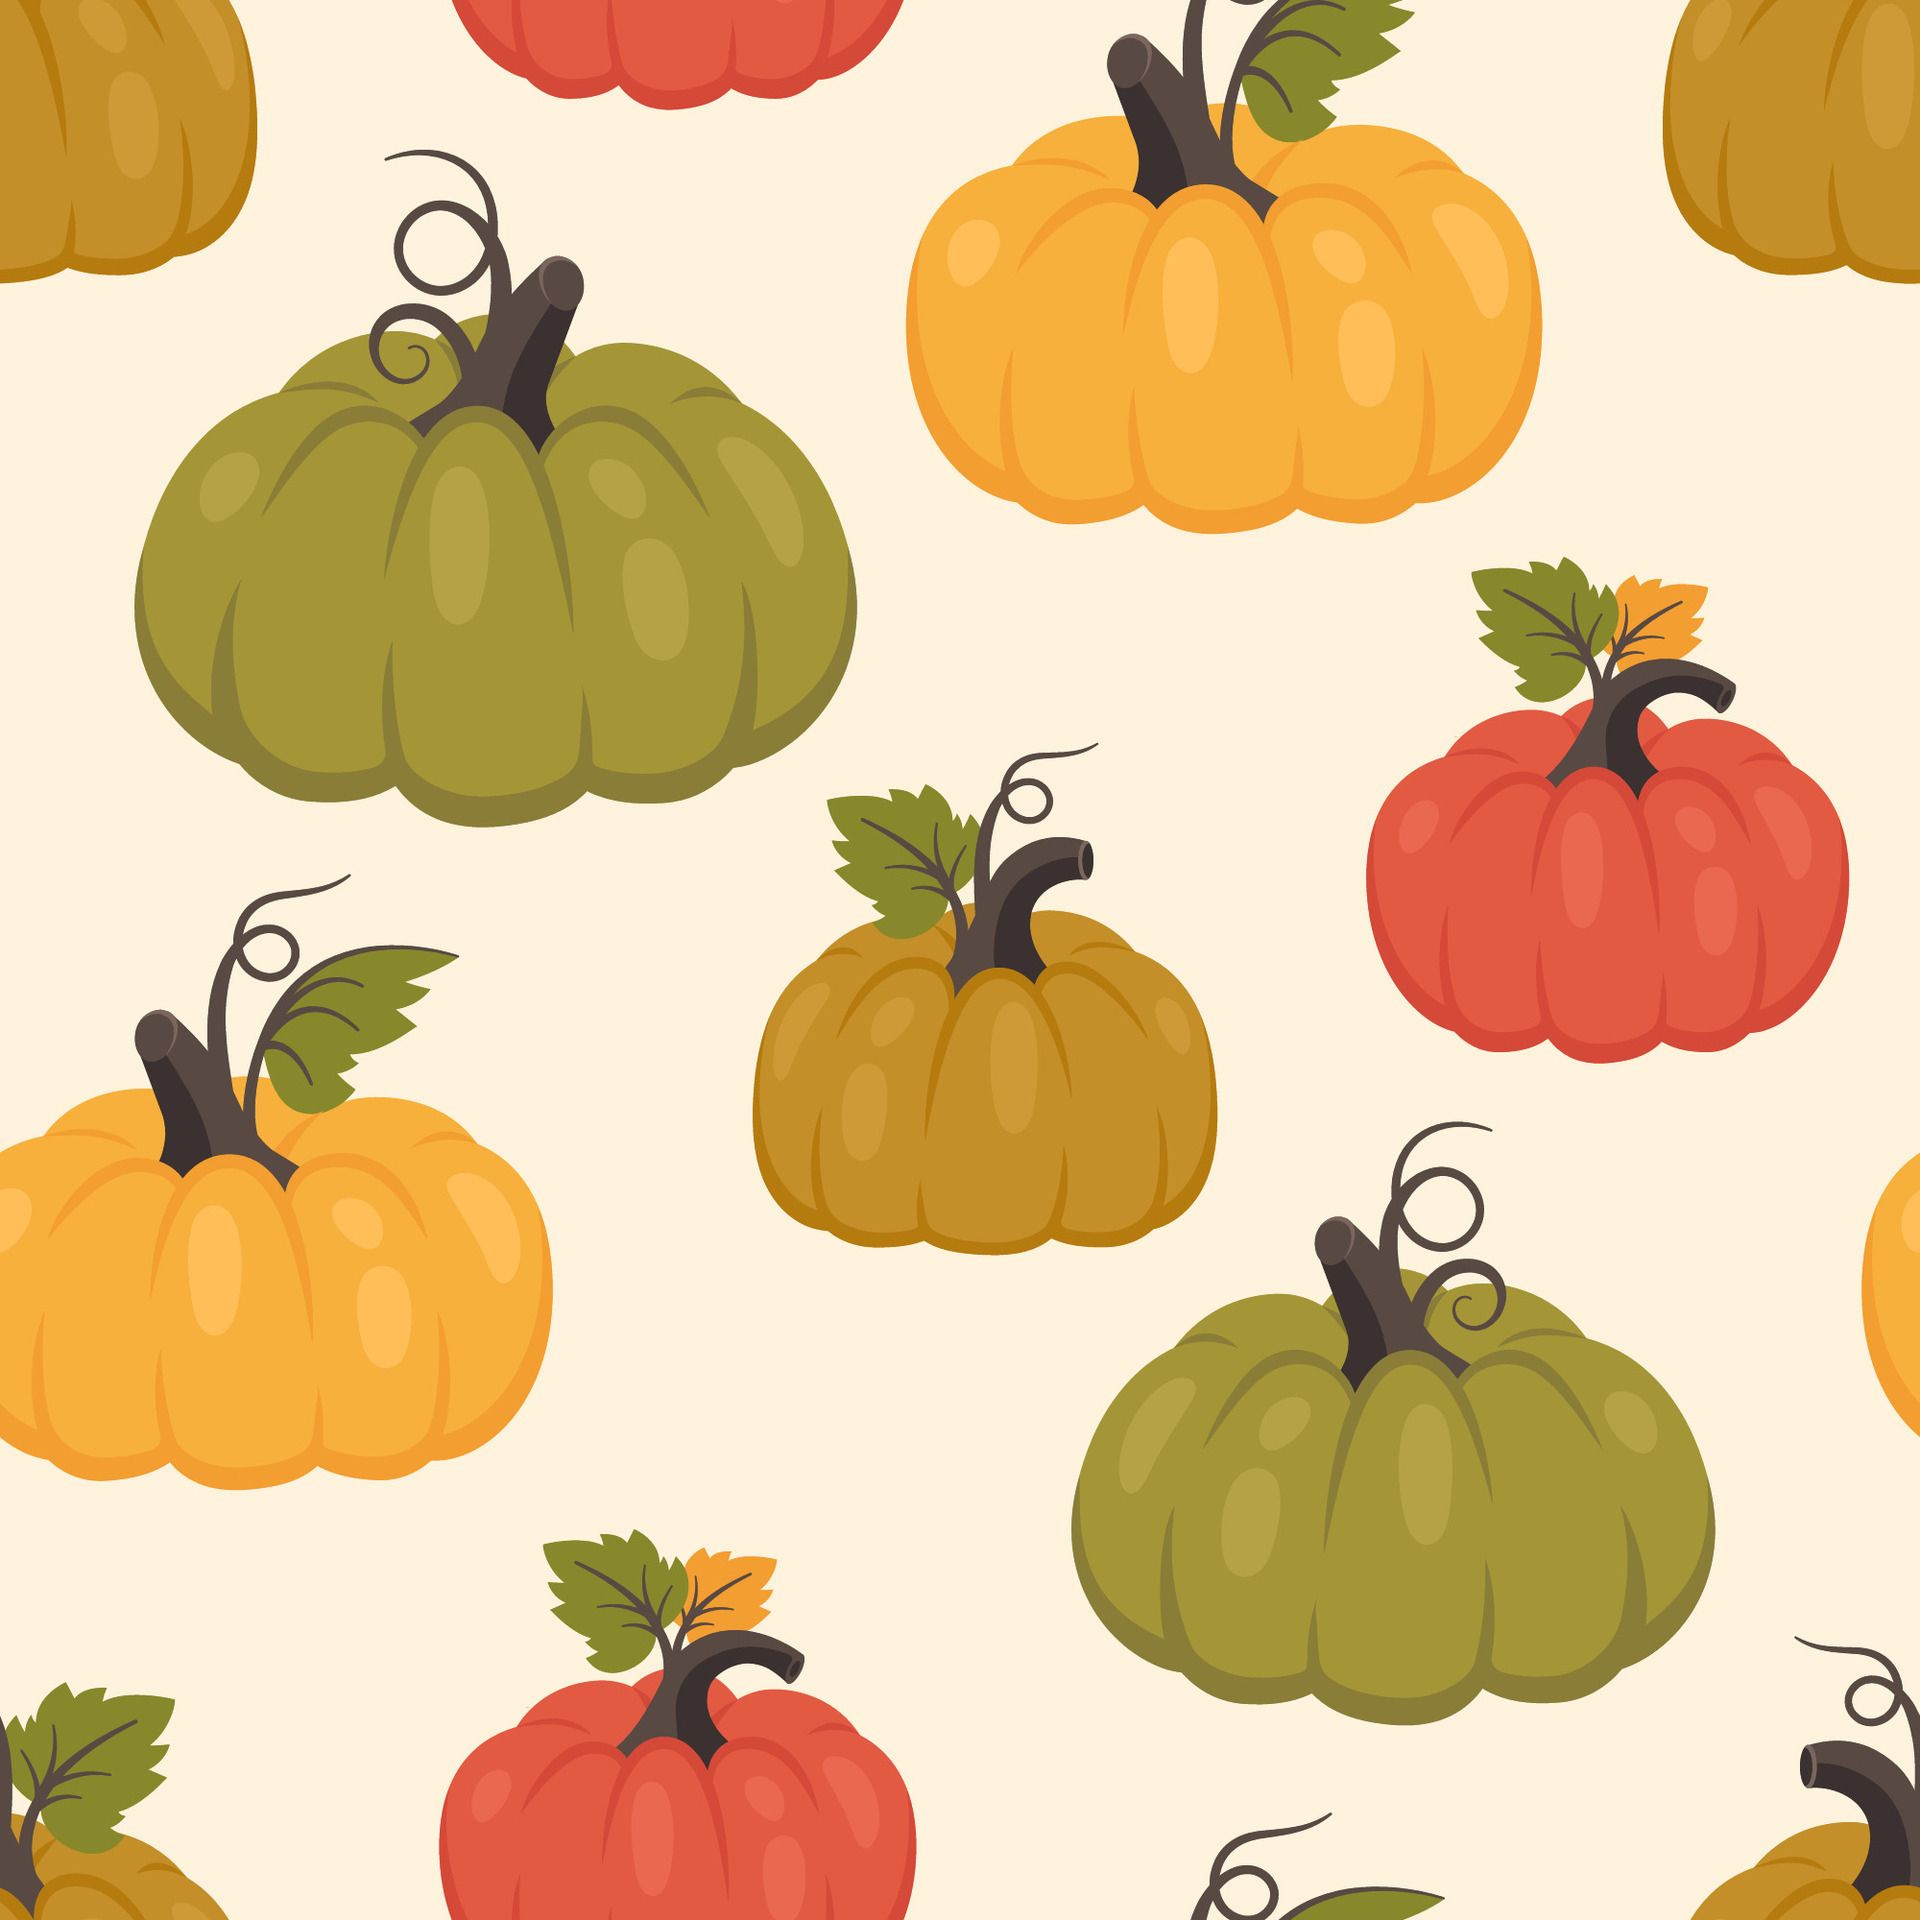 A pattern of orange, green, and red pumpkins with green stems and orange leaves on a cream background. - Thanksgiving